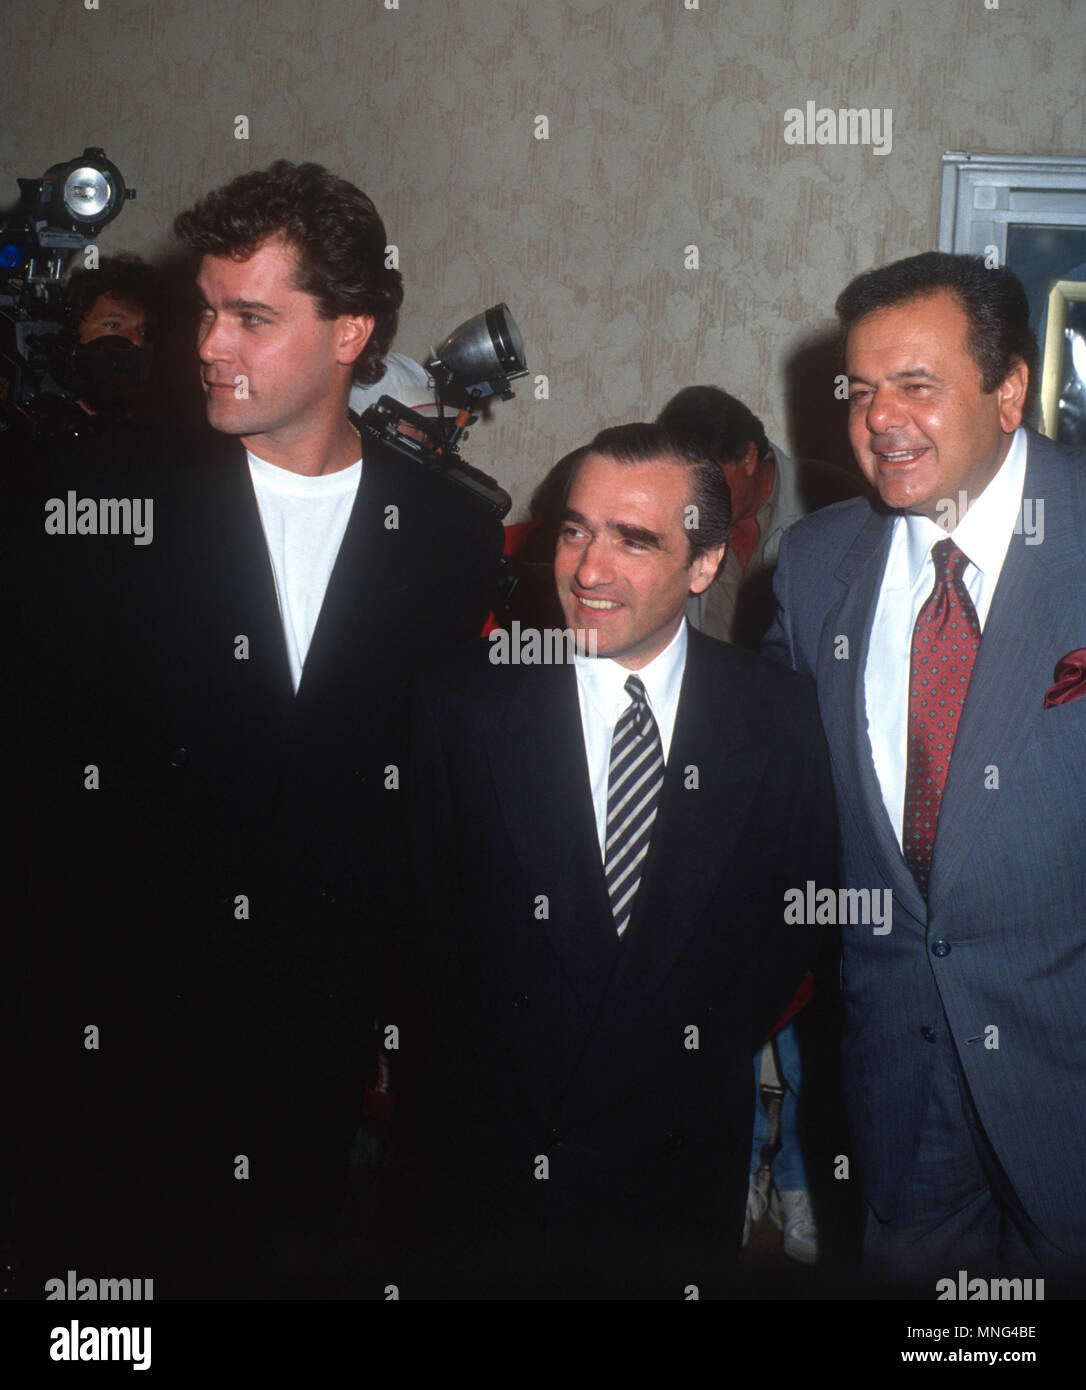 WESTWOOD, CA - SEPTEMBER 17: (L-R) Actor Ray Liotta, director Martin Scorsese and actor Paul Sorvino attend the 'Goodfellas' Westwood Premiere on September 17, 1990 at Mann Bruin Theatre in Westwood, California. Photo by Barry King/Alamy Stock Photo Stock Photo